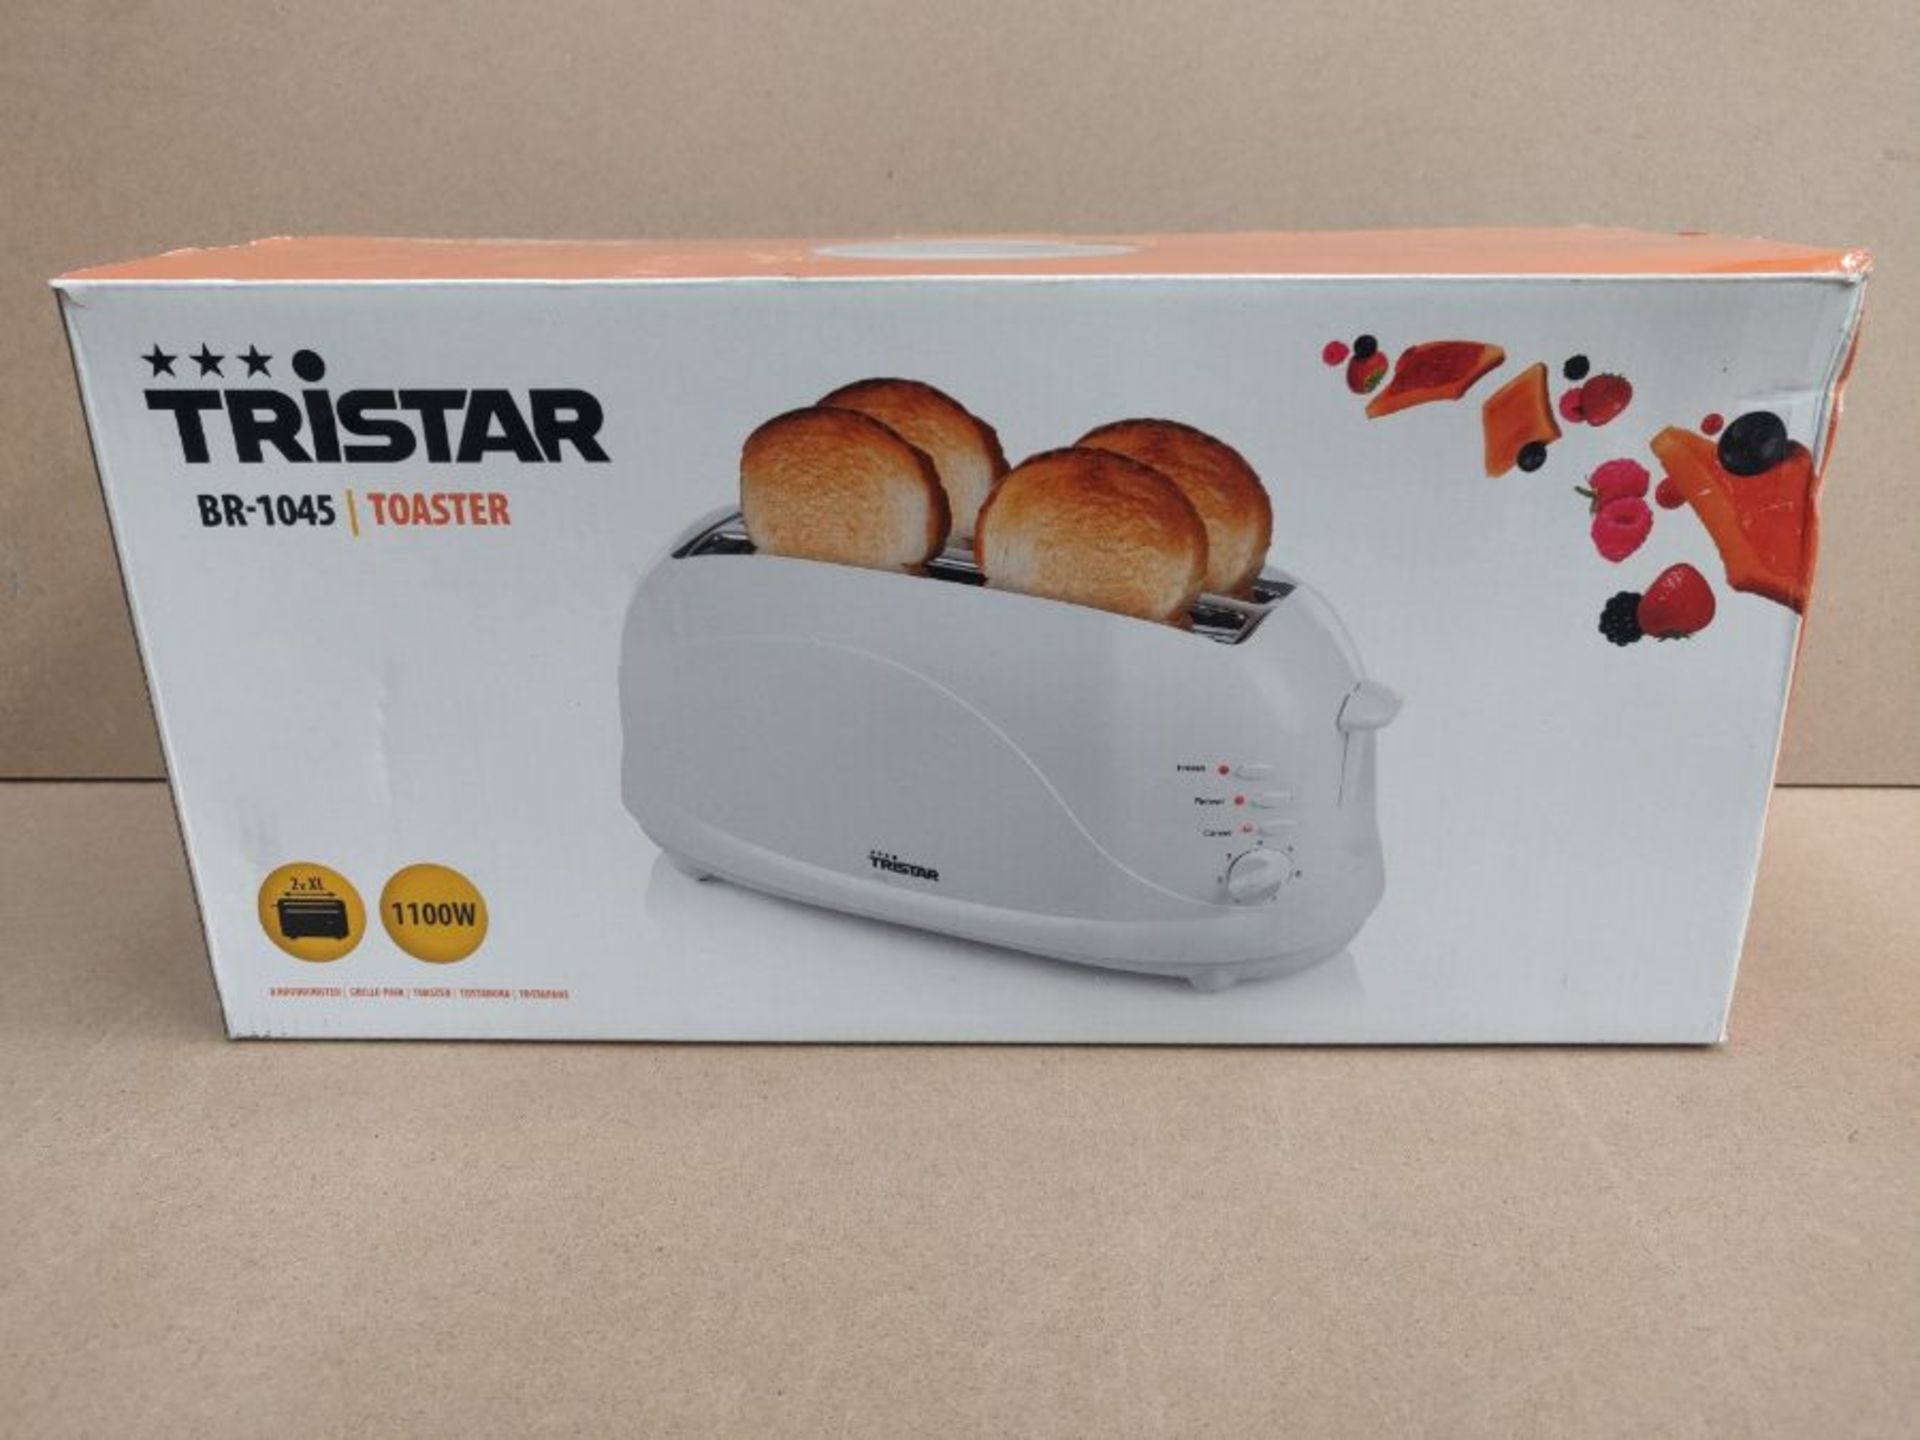 Tristar BR-1045 Toaster BR-1045 Toaster, 4 slice(s), White, Buttons,Rotary, 1100 W - Image 2 of 3